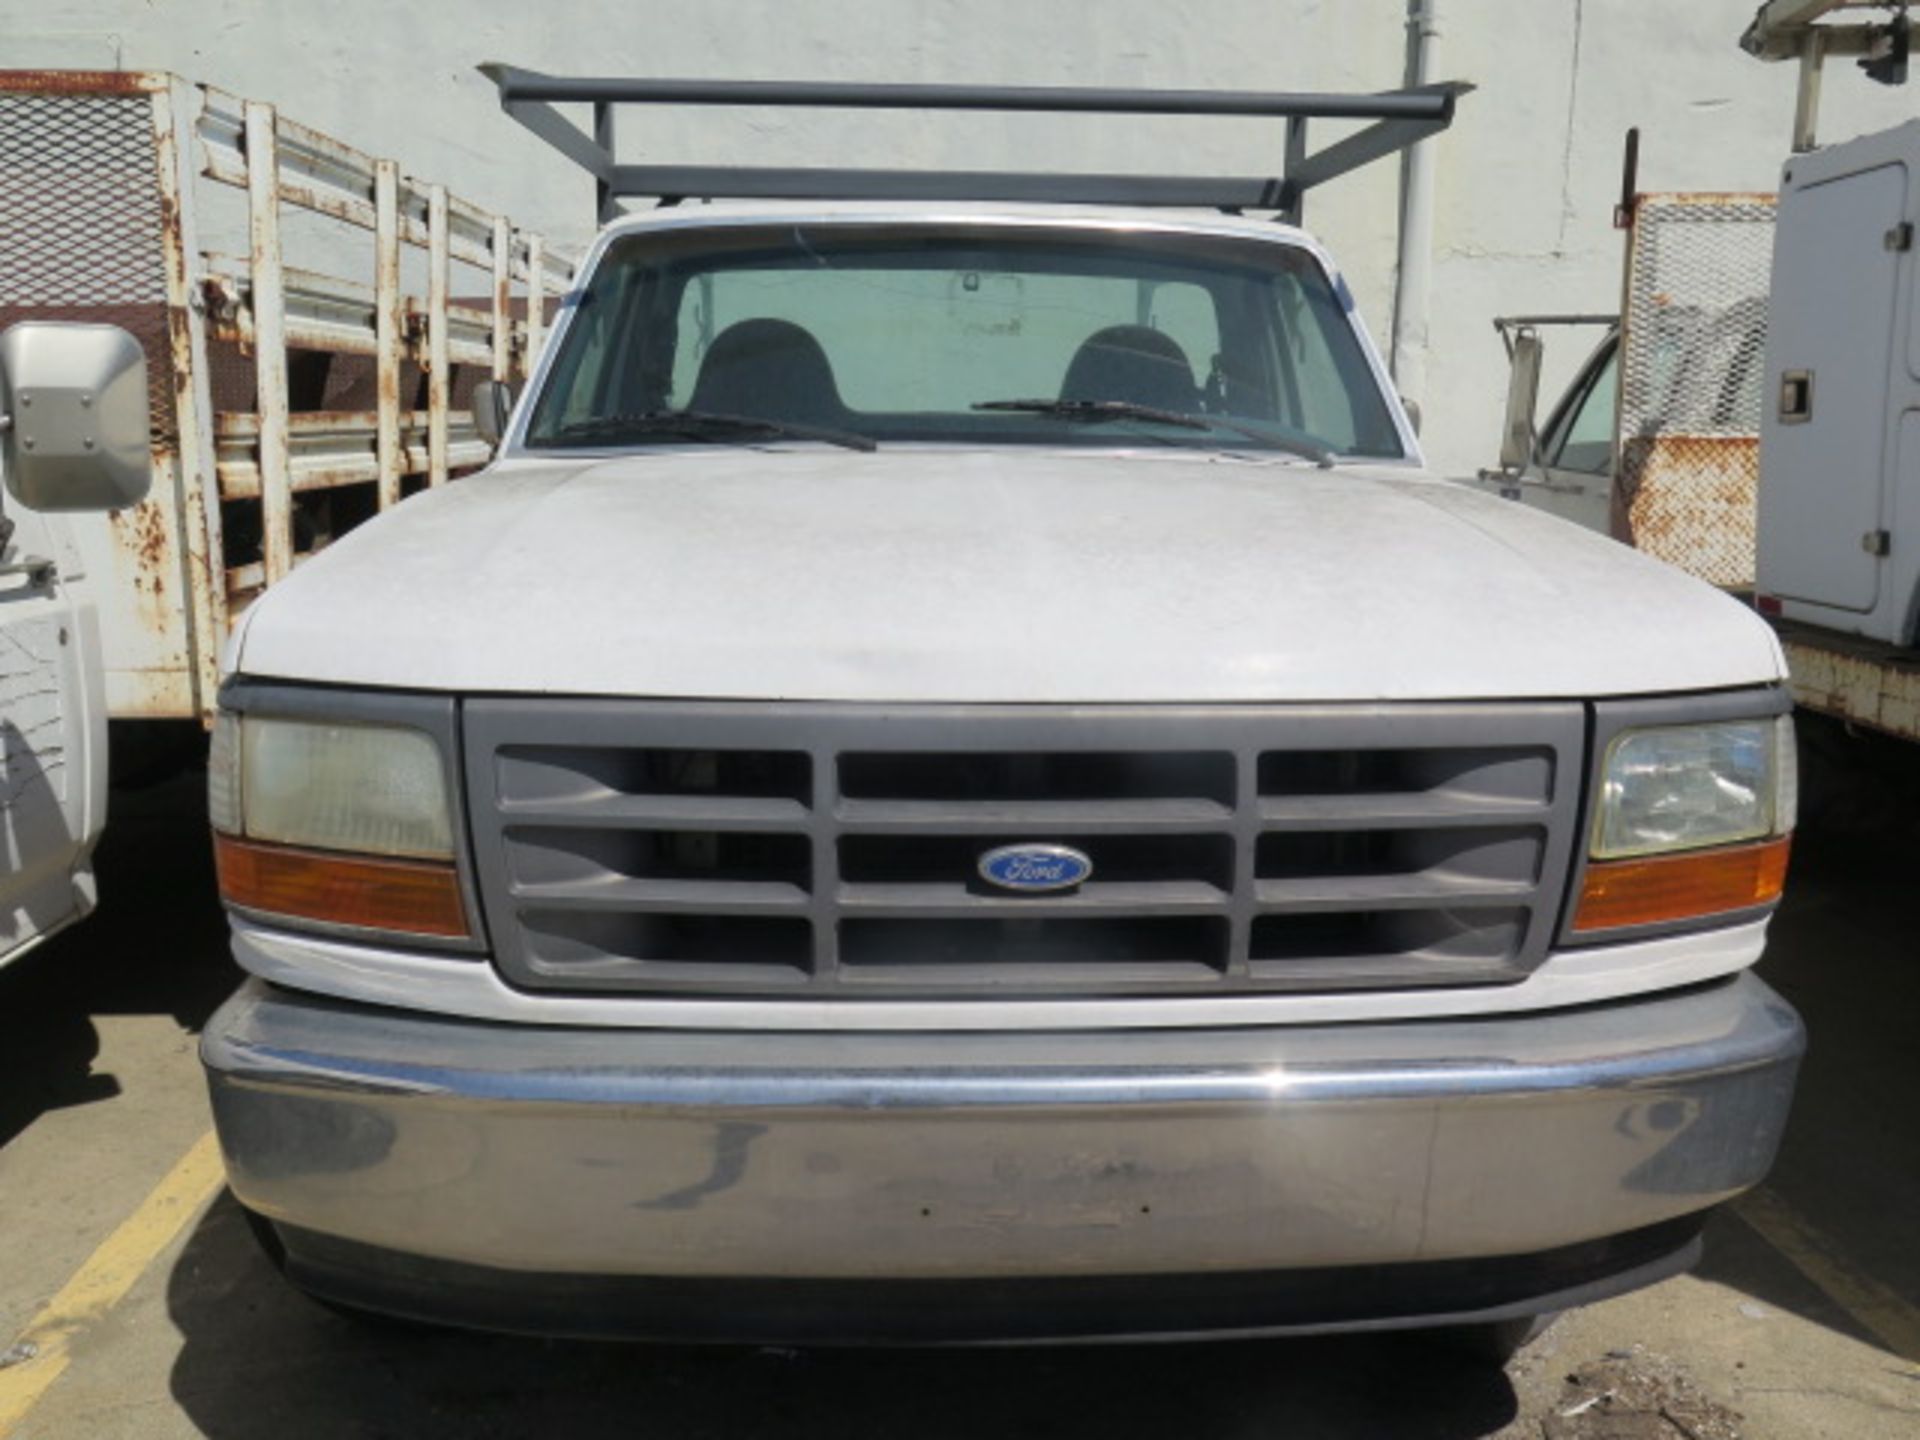 1995 Ford F-250XL Service Truck w/ Gas Engine, Automatic Trans, AC Vin# 1FTEF25N15NB11666,SOLD AS IS - Image 2 of 11